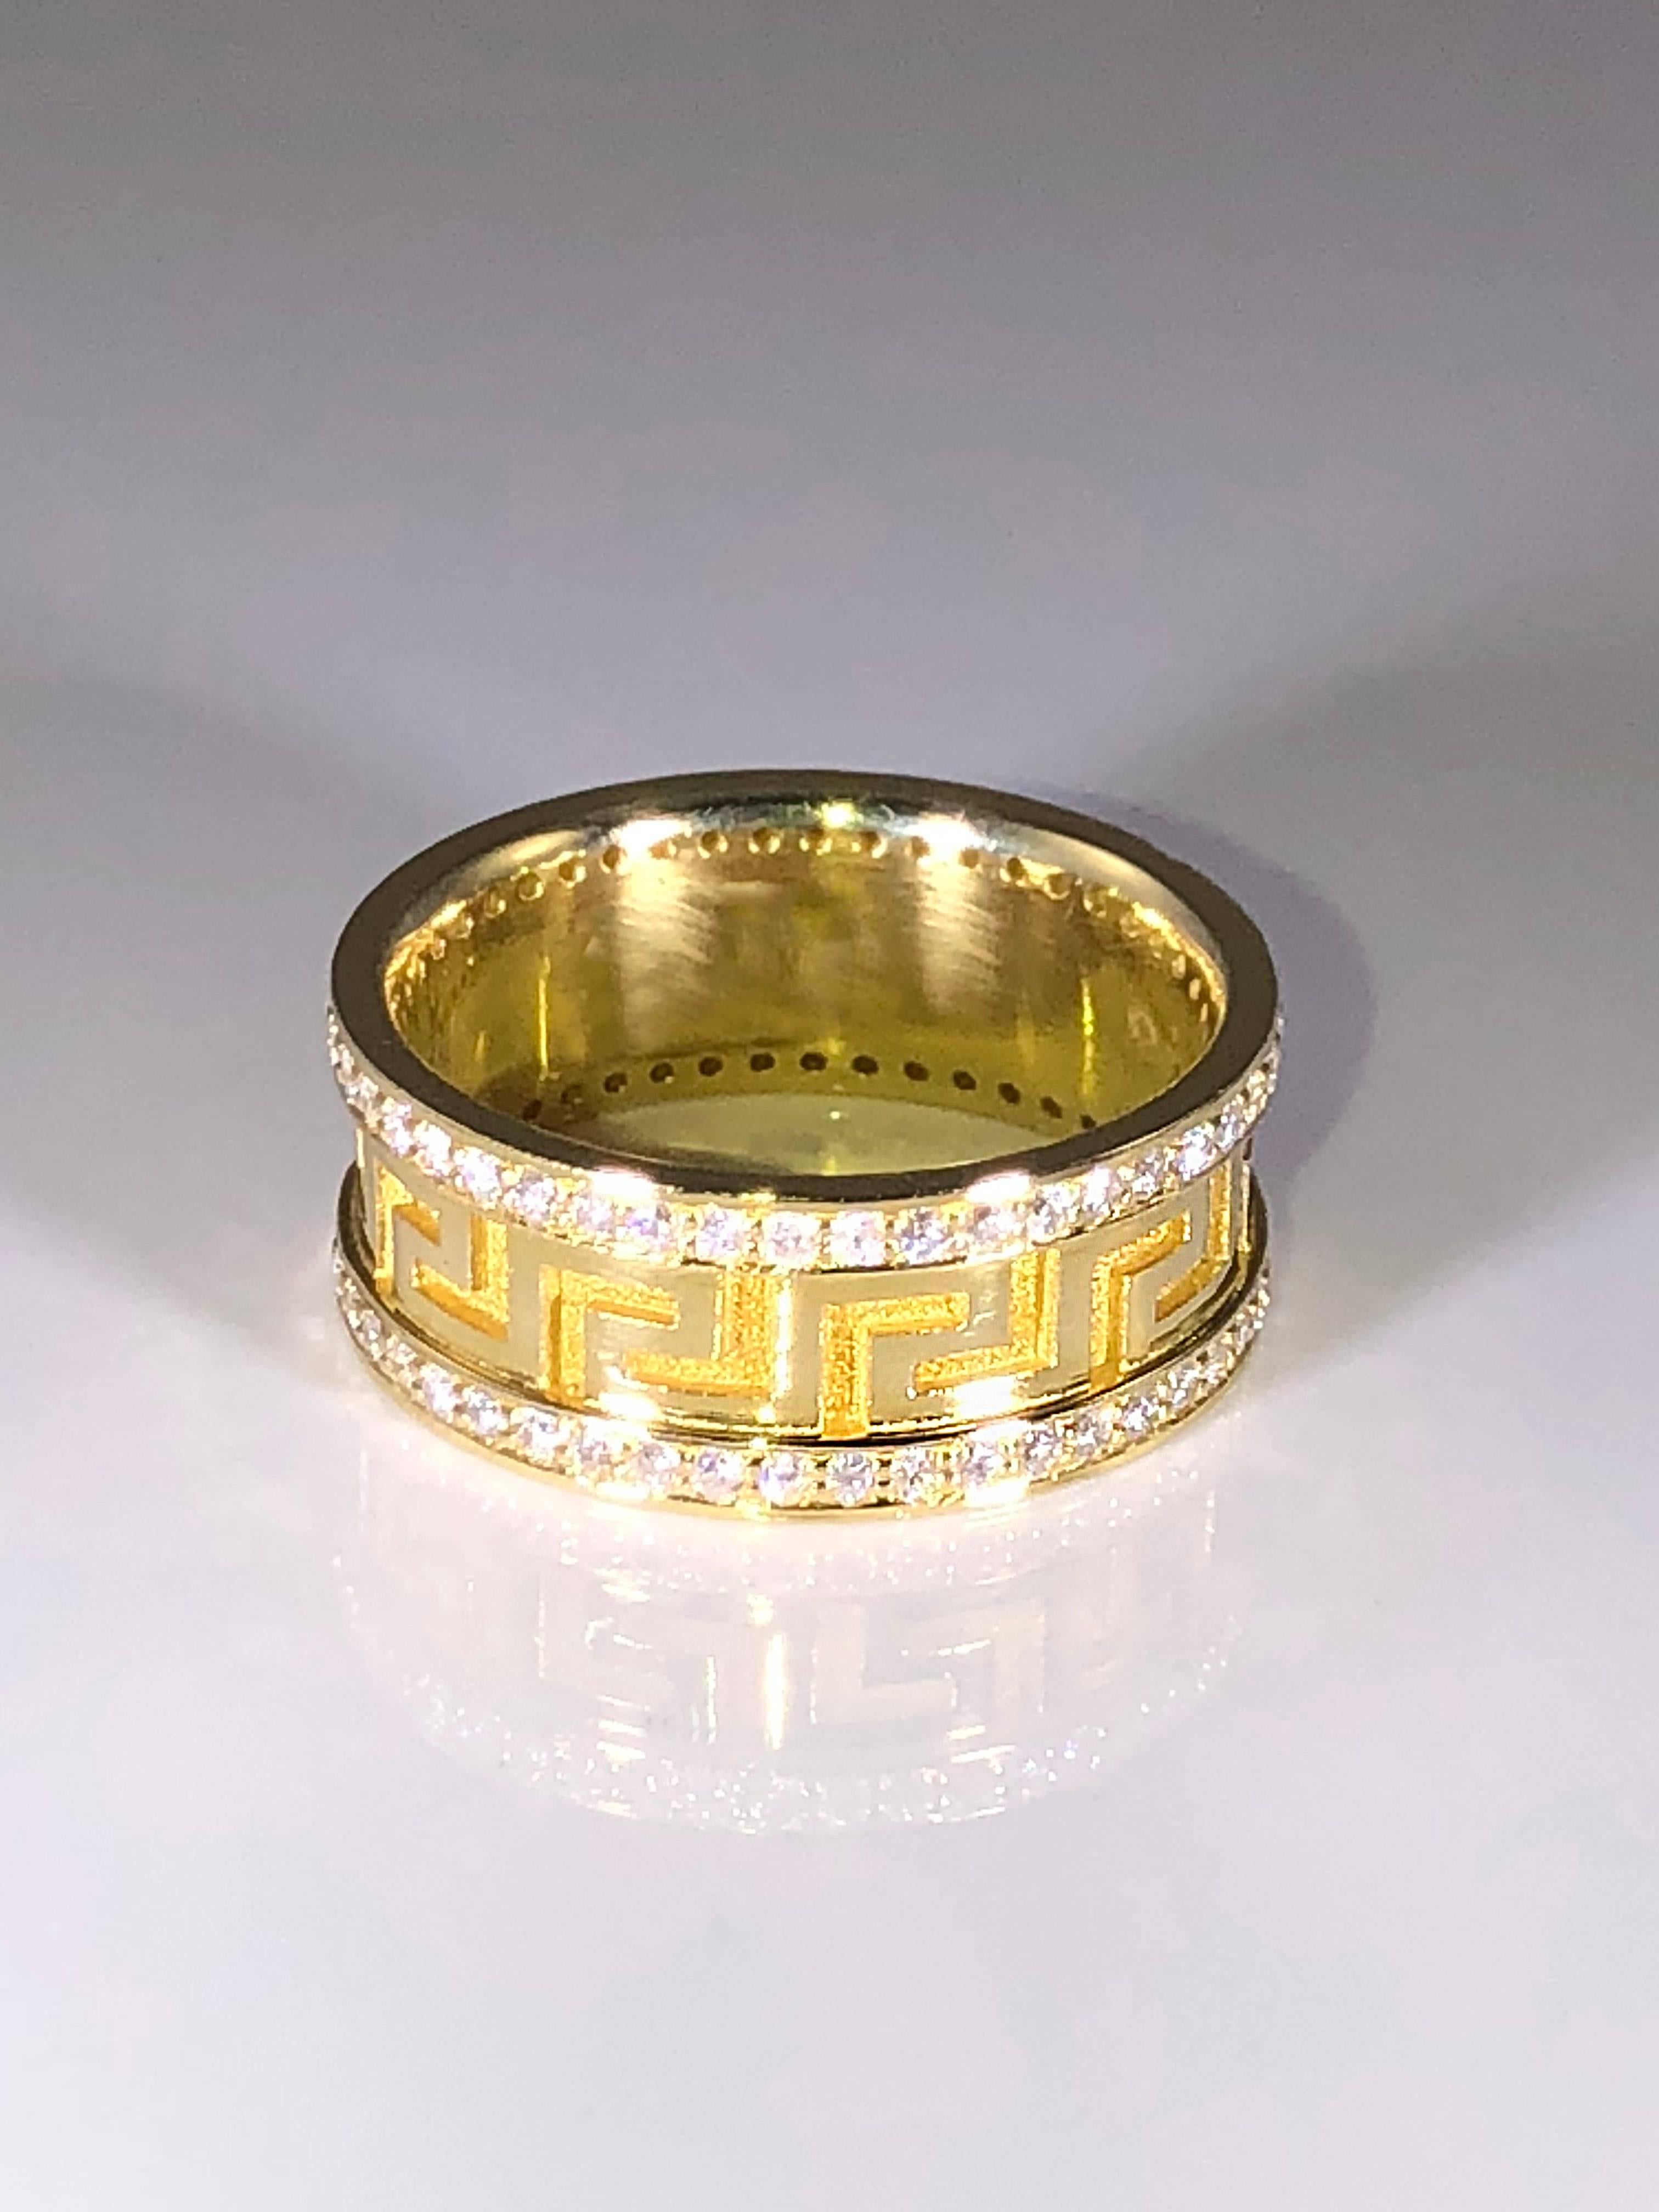 S.Georgios designer solid yellow gold 18 karat diamond band ring is all handmade and has the design of the Greek Key all the way around, which symbolizes eternal life, the most known and classic design in the world.
This gorgeous ring has a unique